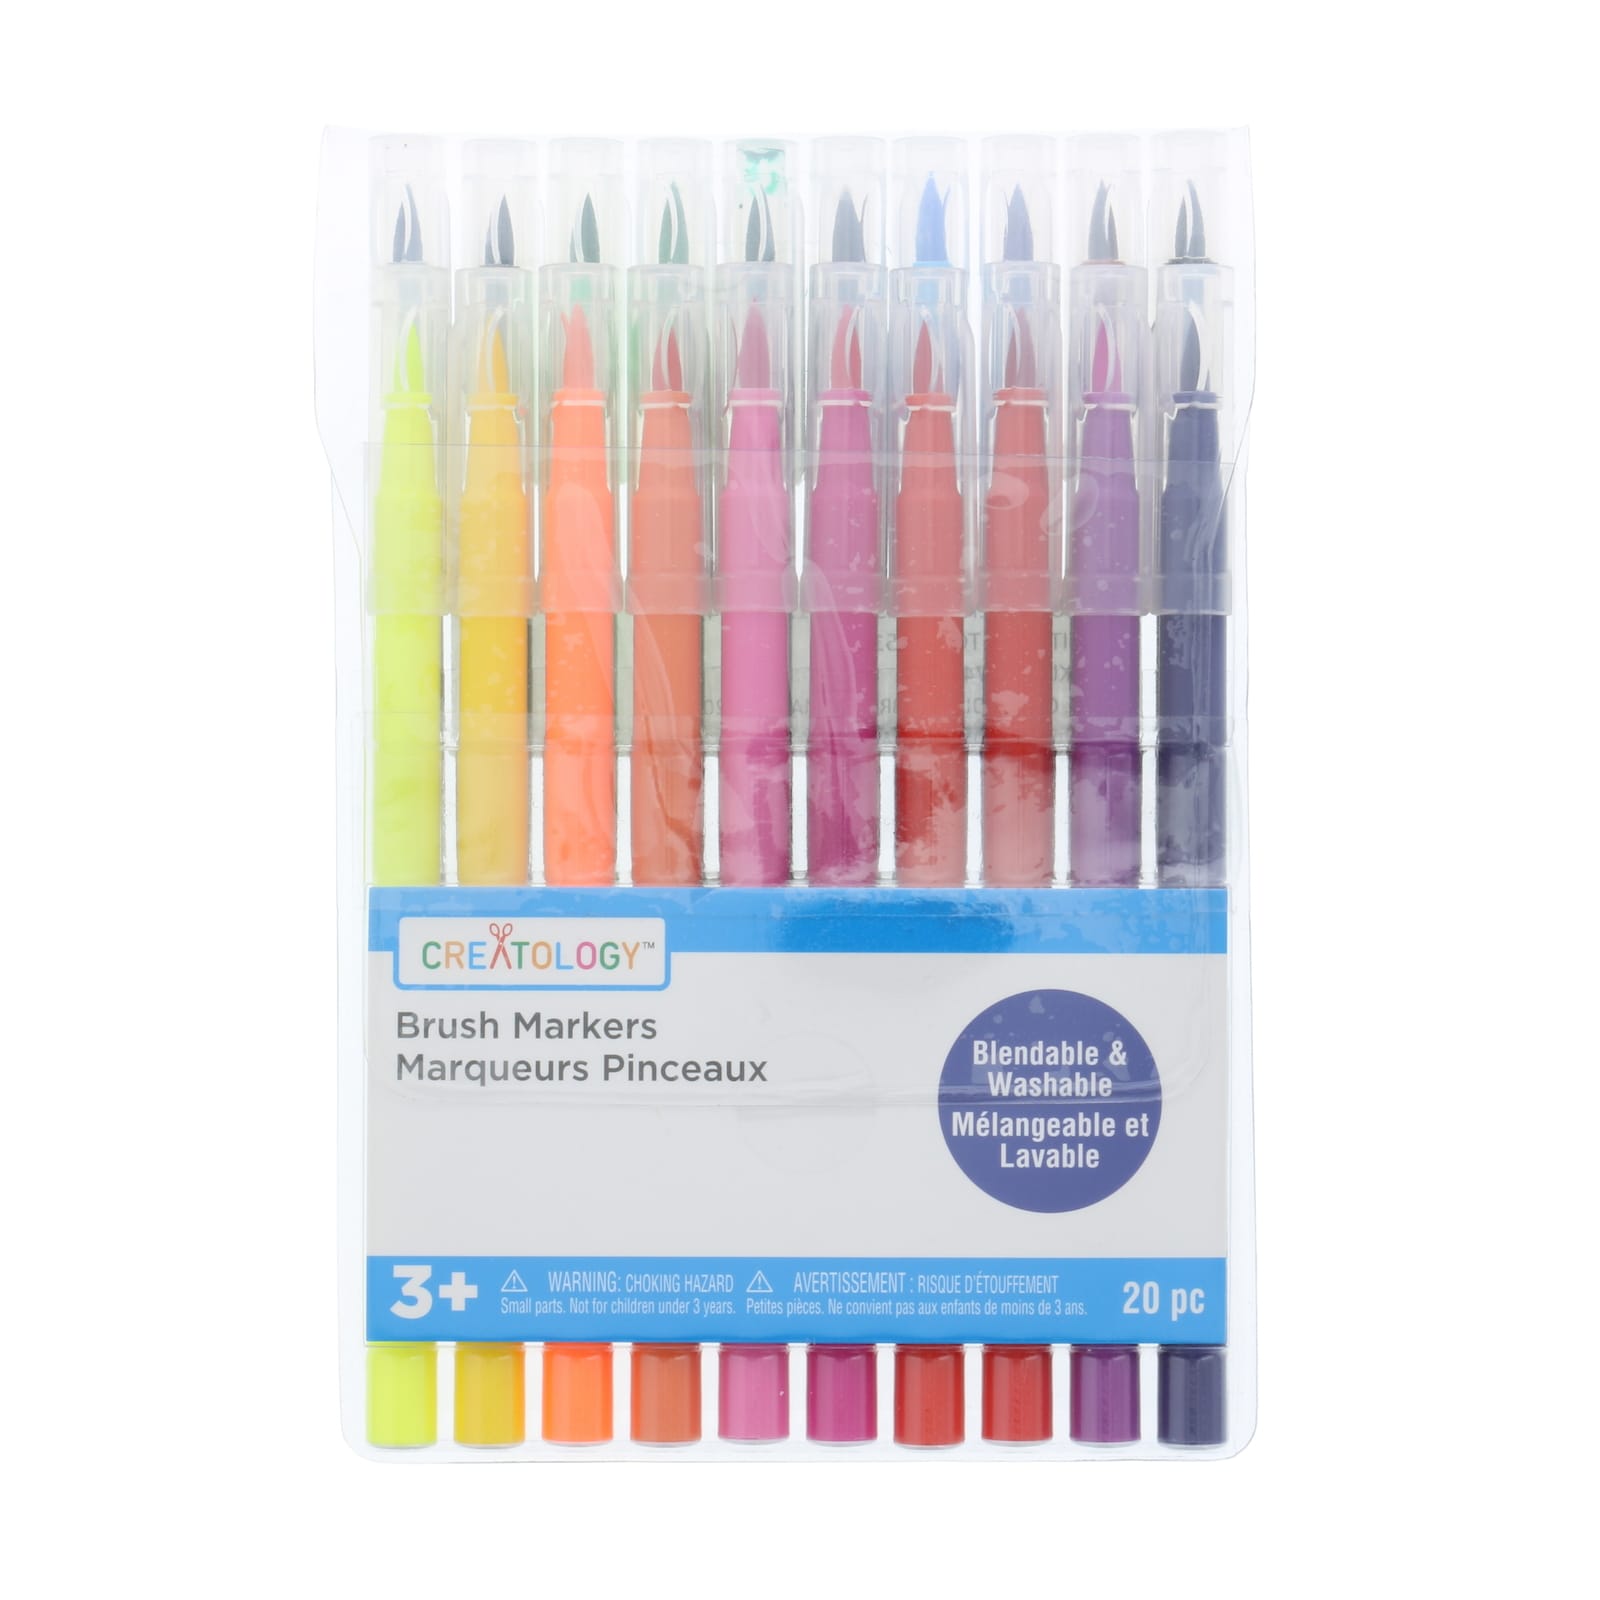 Creatology Primary Broad Line Washable Marker Set - Each